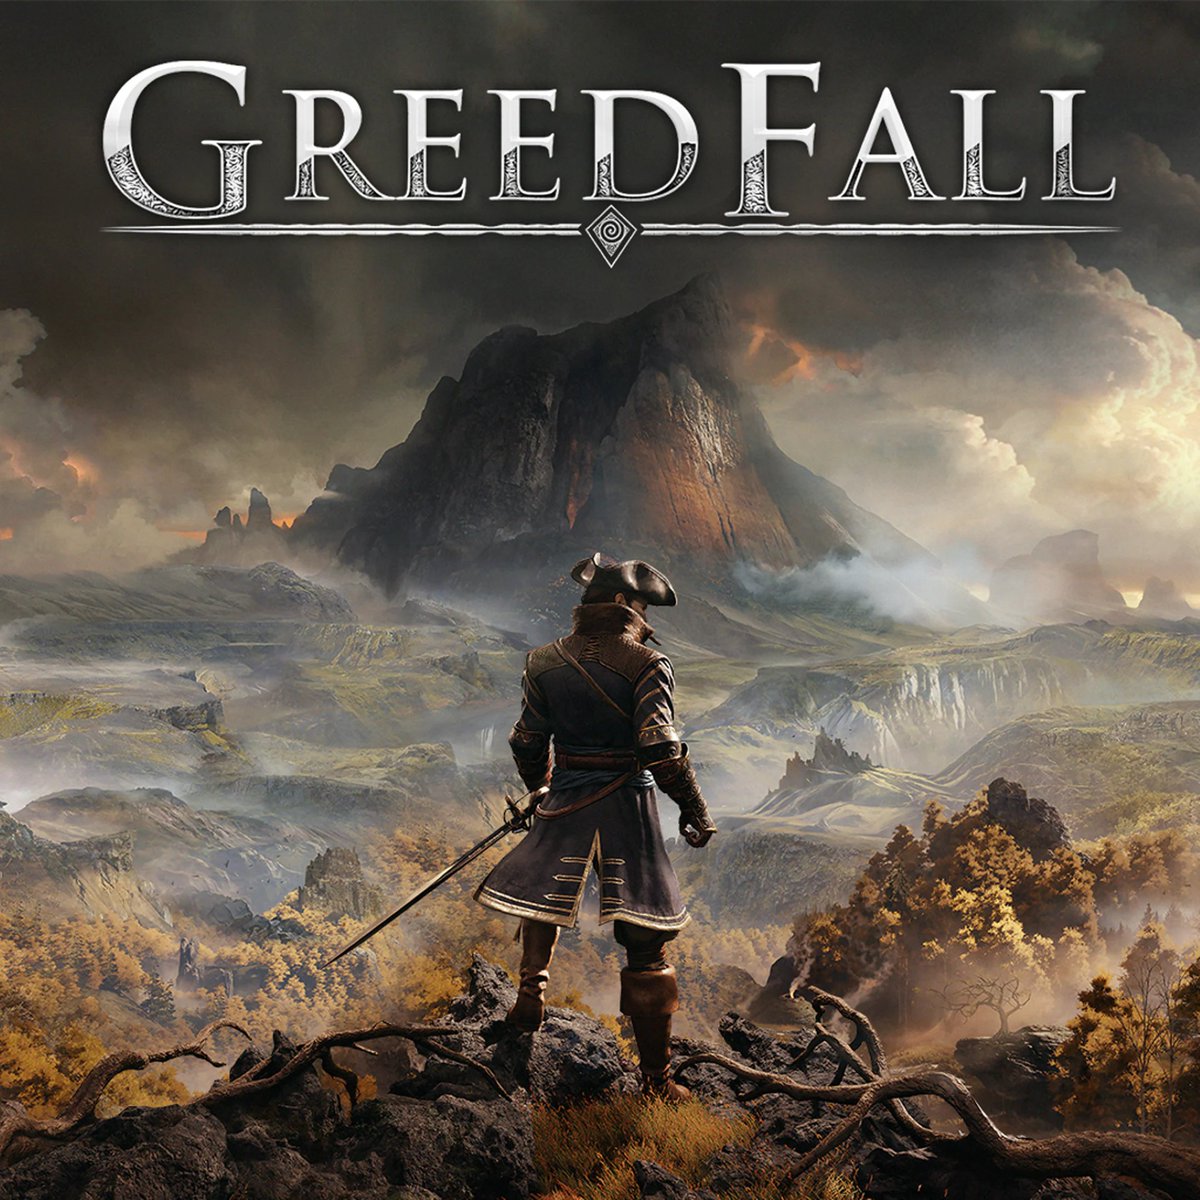 #FTKGiveaway: 1 x GreedFall Steam Key
Retweet and Follow @FTKGames to enter

A winner will be picked in 6 hours, good luck!
More free games currently available: freetokeep.gg